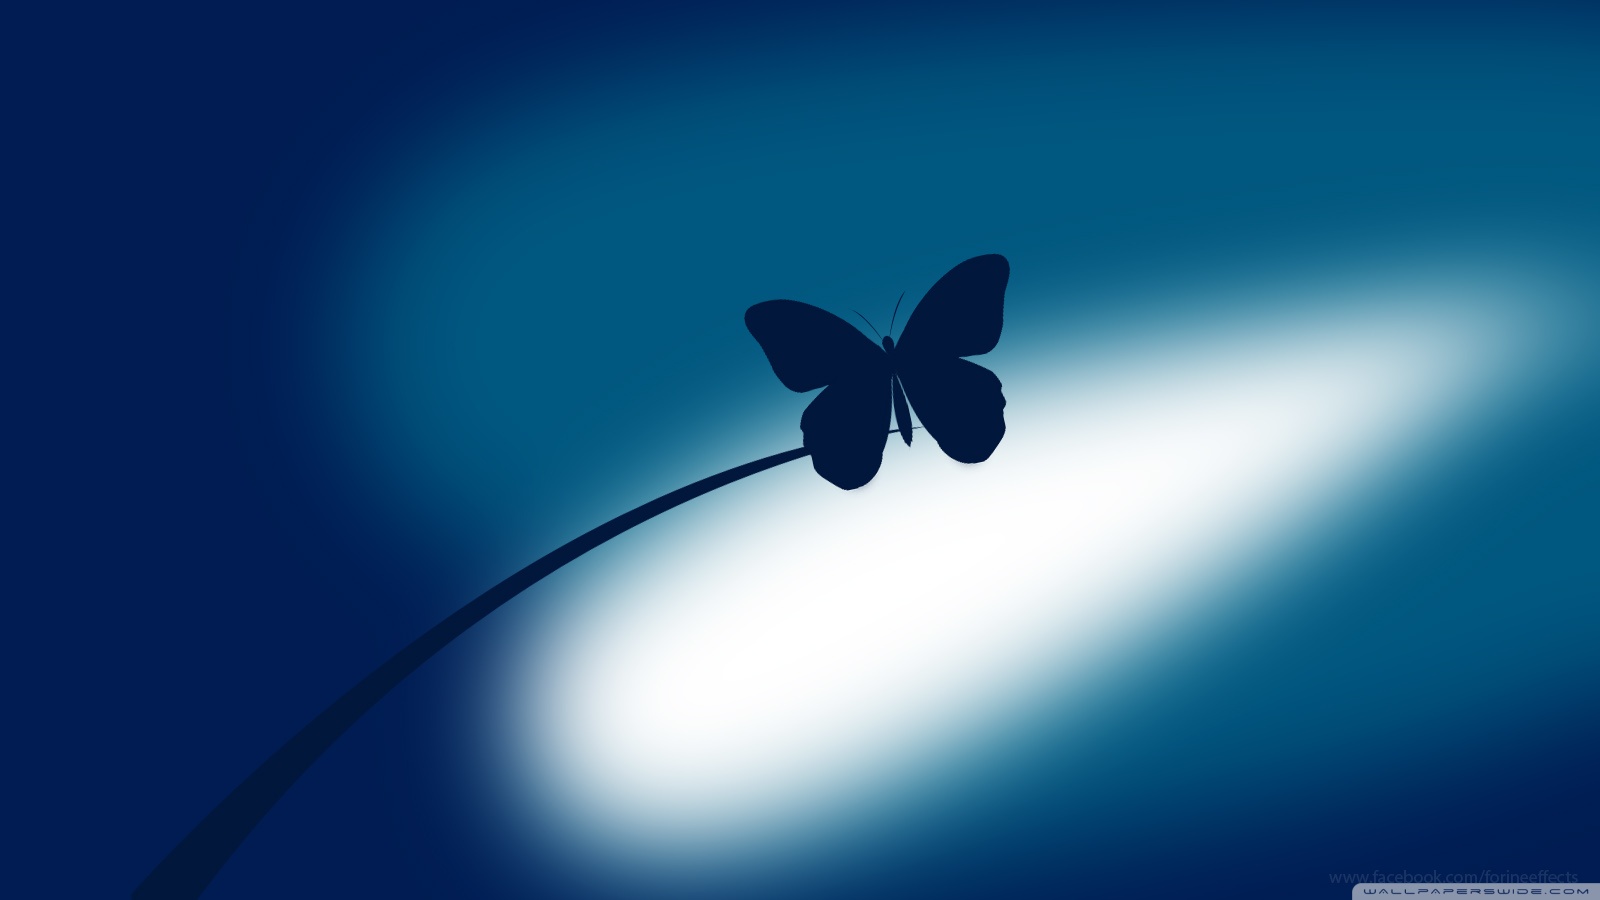 Blue Butterfly Wallpaper High Definition For Free Wallpaper - Blue Butterfly Images Hd - HD Wallpaper 